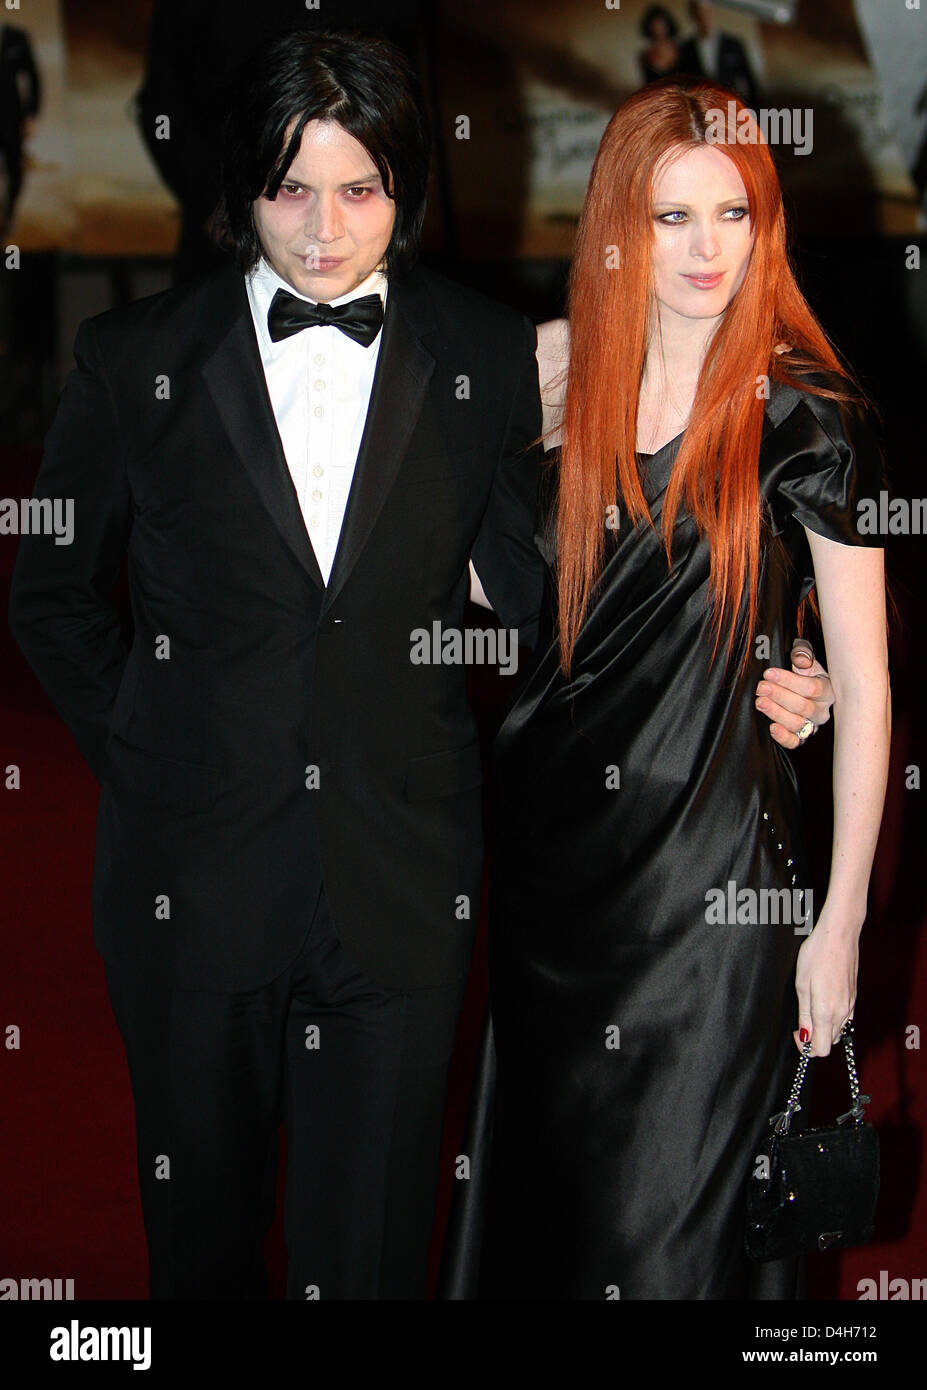 Singer Jack White and his wife Karen Elson arrive for the world premiere of the new James Bond film 'Quantum Of Solace' at Odeon Leicester Square in London, Great Britain, 29 October 2008. Photo: Patrick van Katwijk Stock Photo